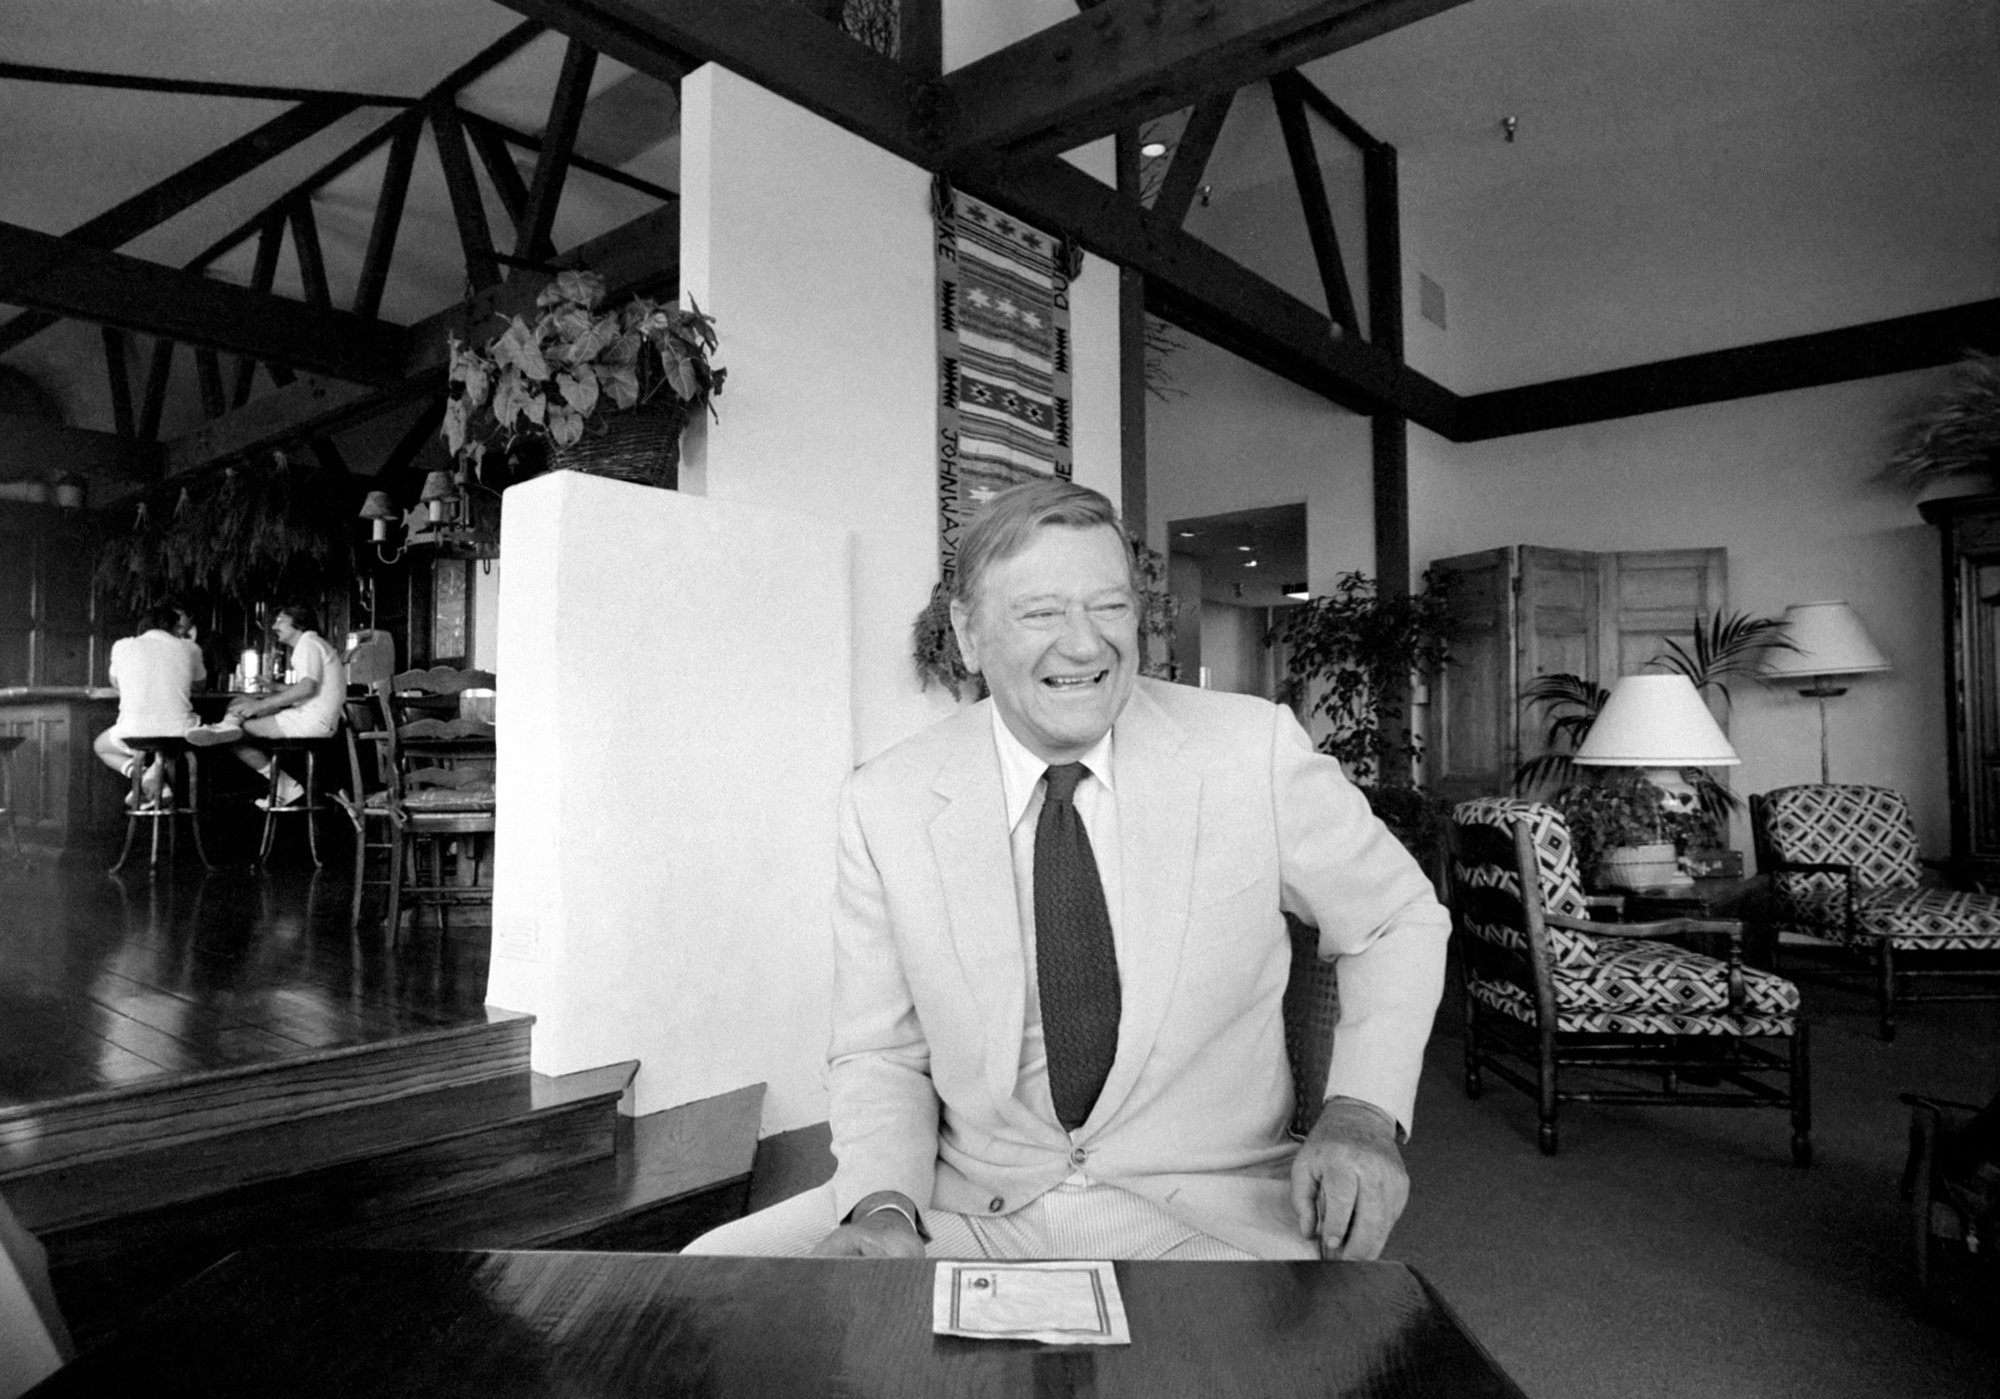 John Wayne, who has a coffee recipe made after him. He's smiling, wearing a suit and tie, seated at a table in his home.